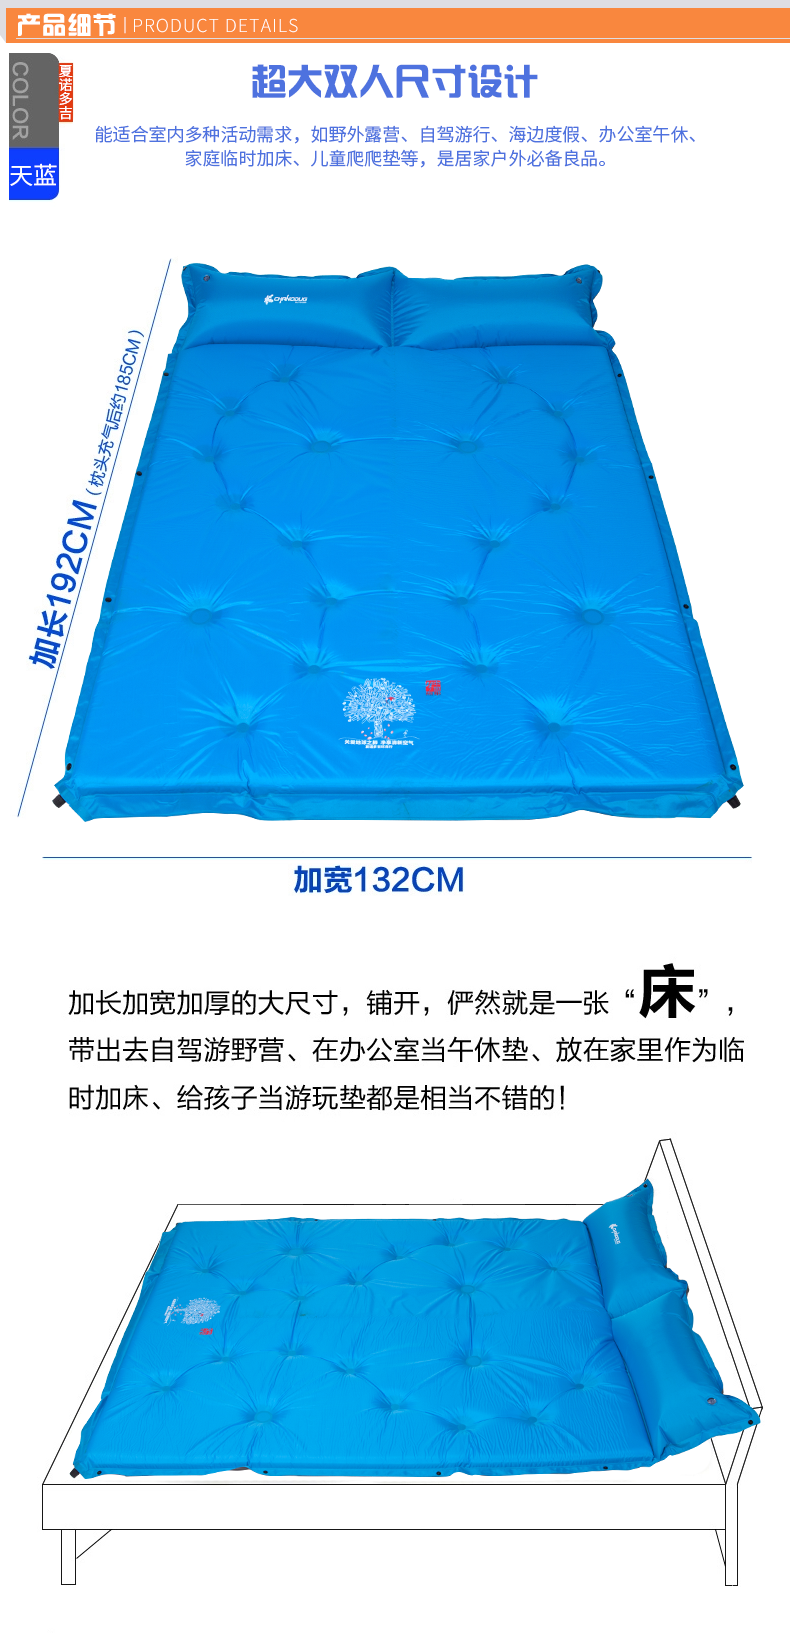 Outdoor automatic inflatable cushion tent cushion moisture